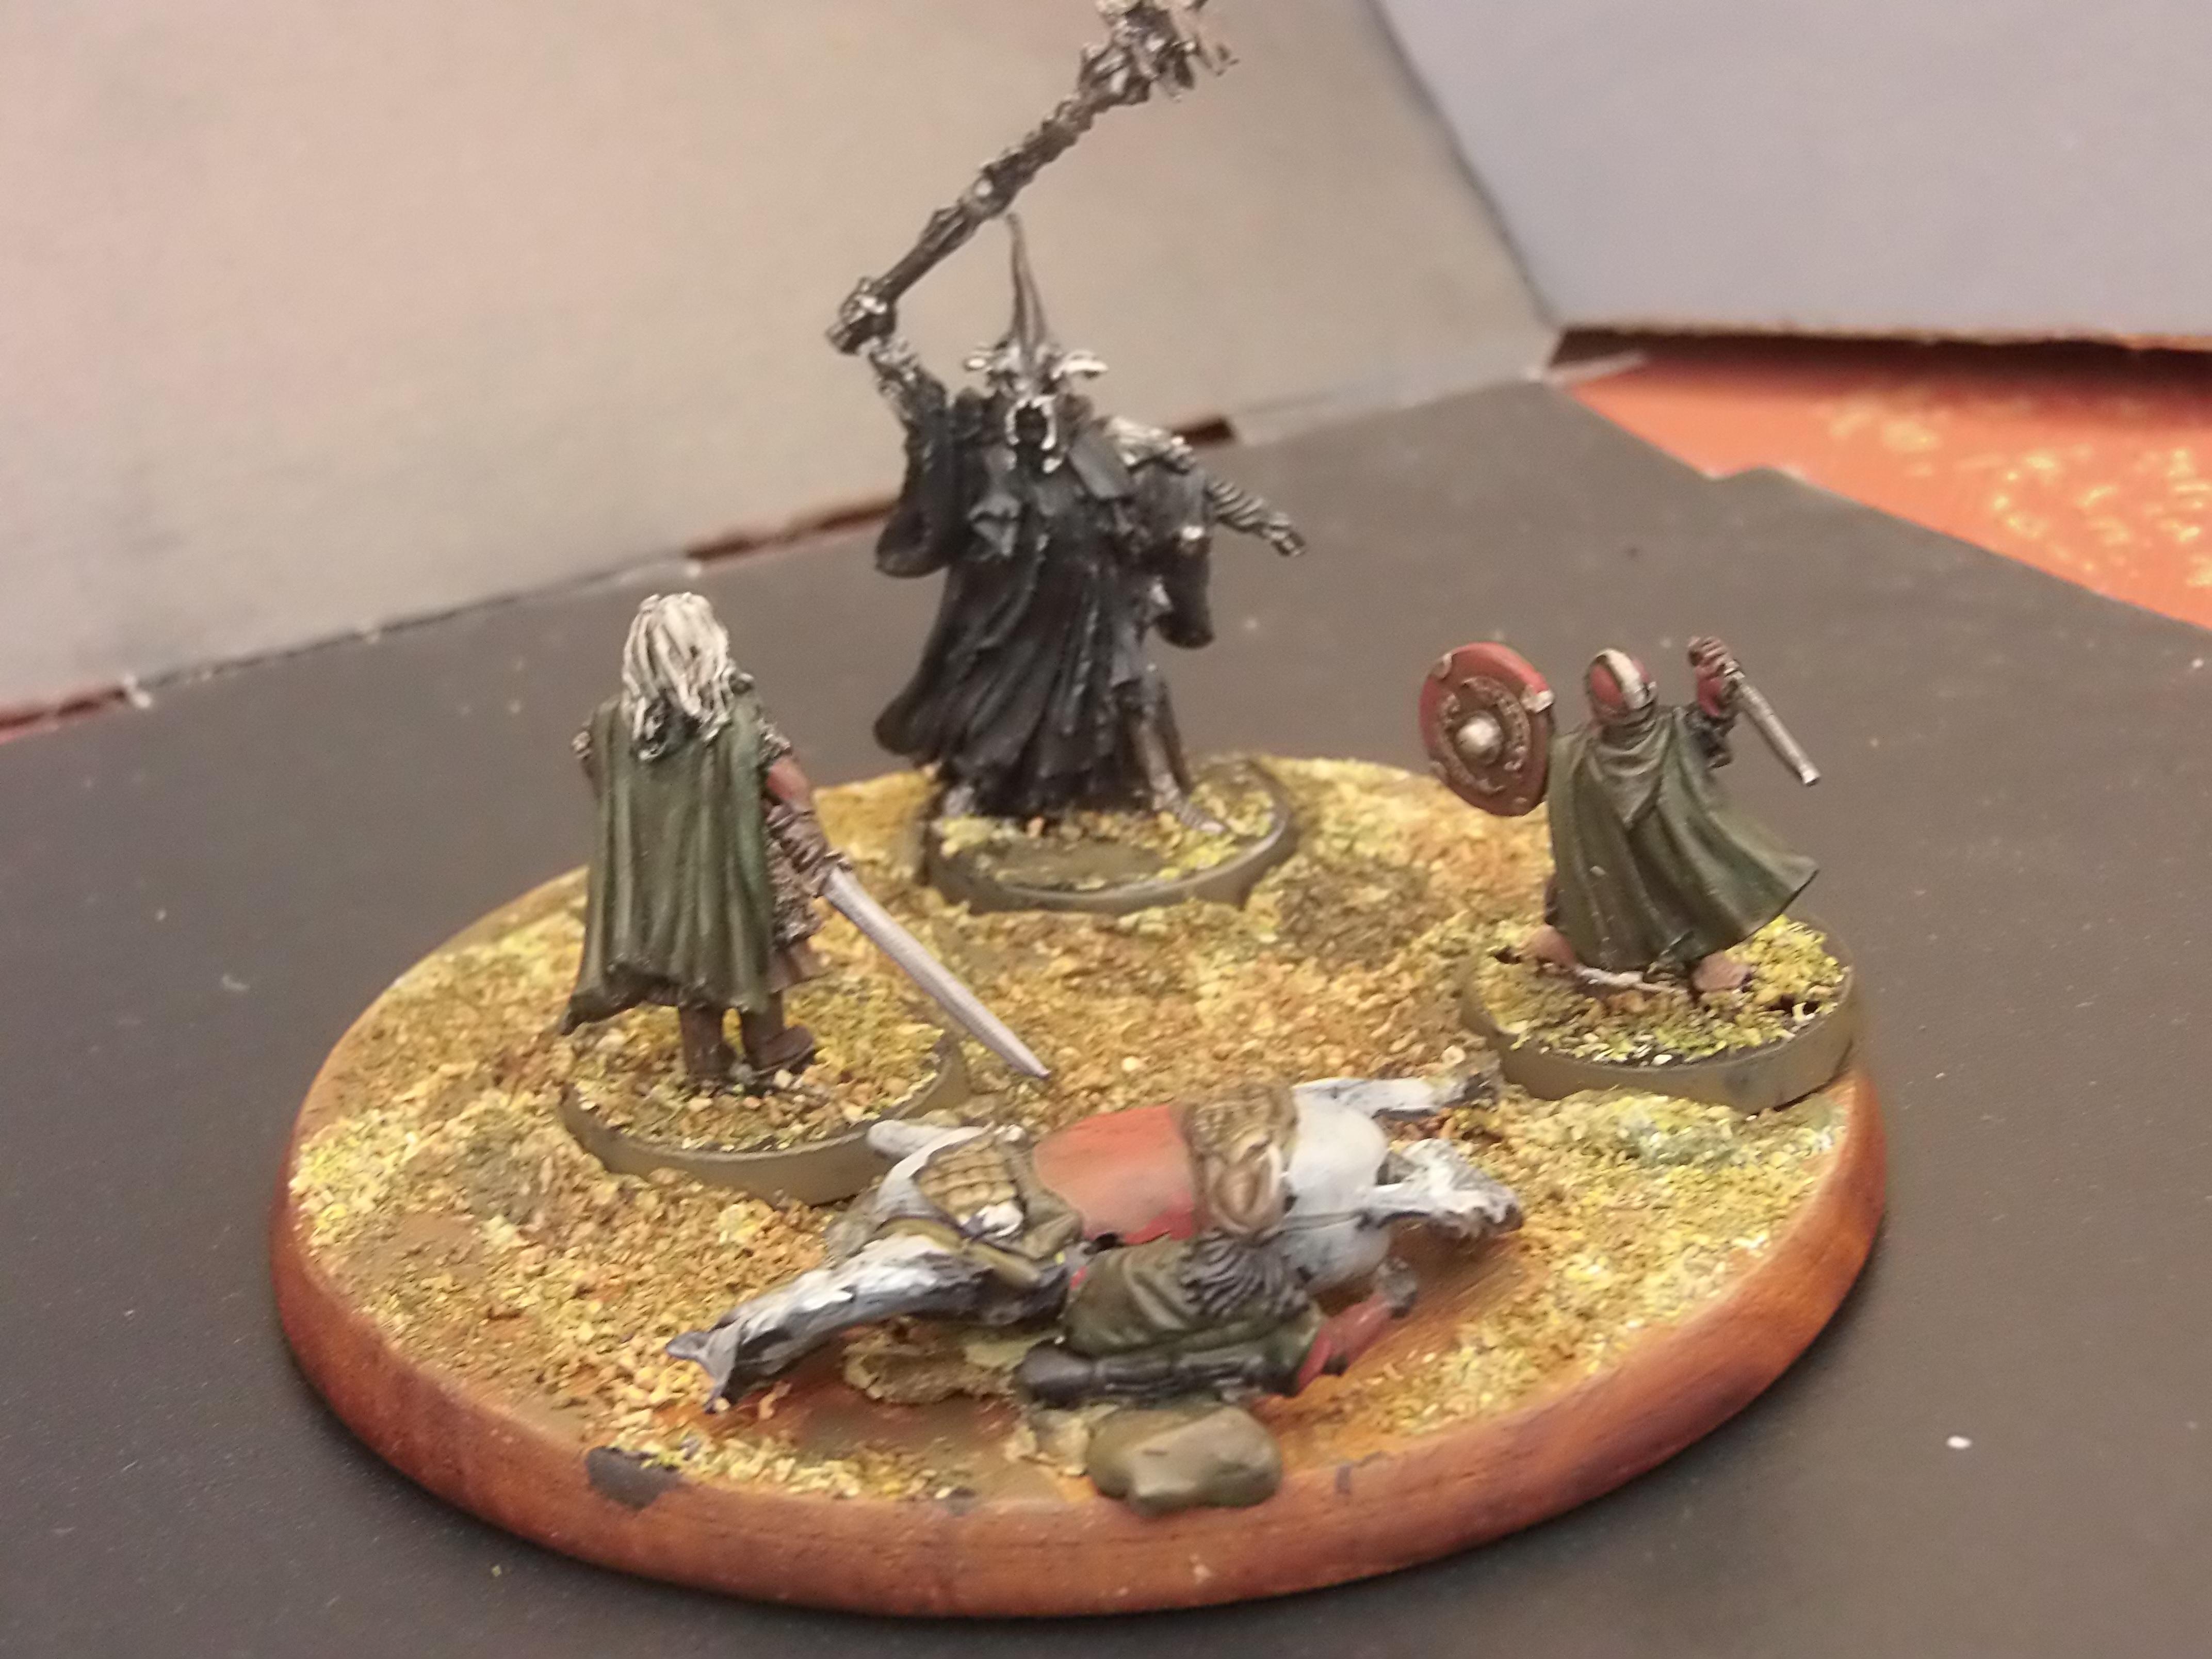 Diorama, Display, Eowyn, Hobbit, Lord Of The Rings, Nazgul, Return Of The King, Ringwraith, Rohan, Tolkien